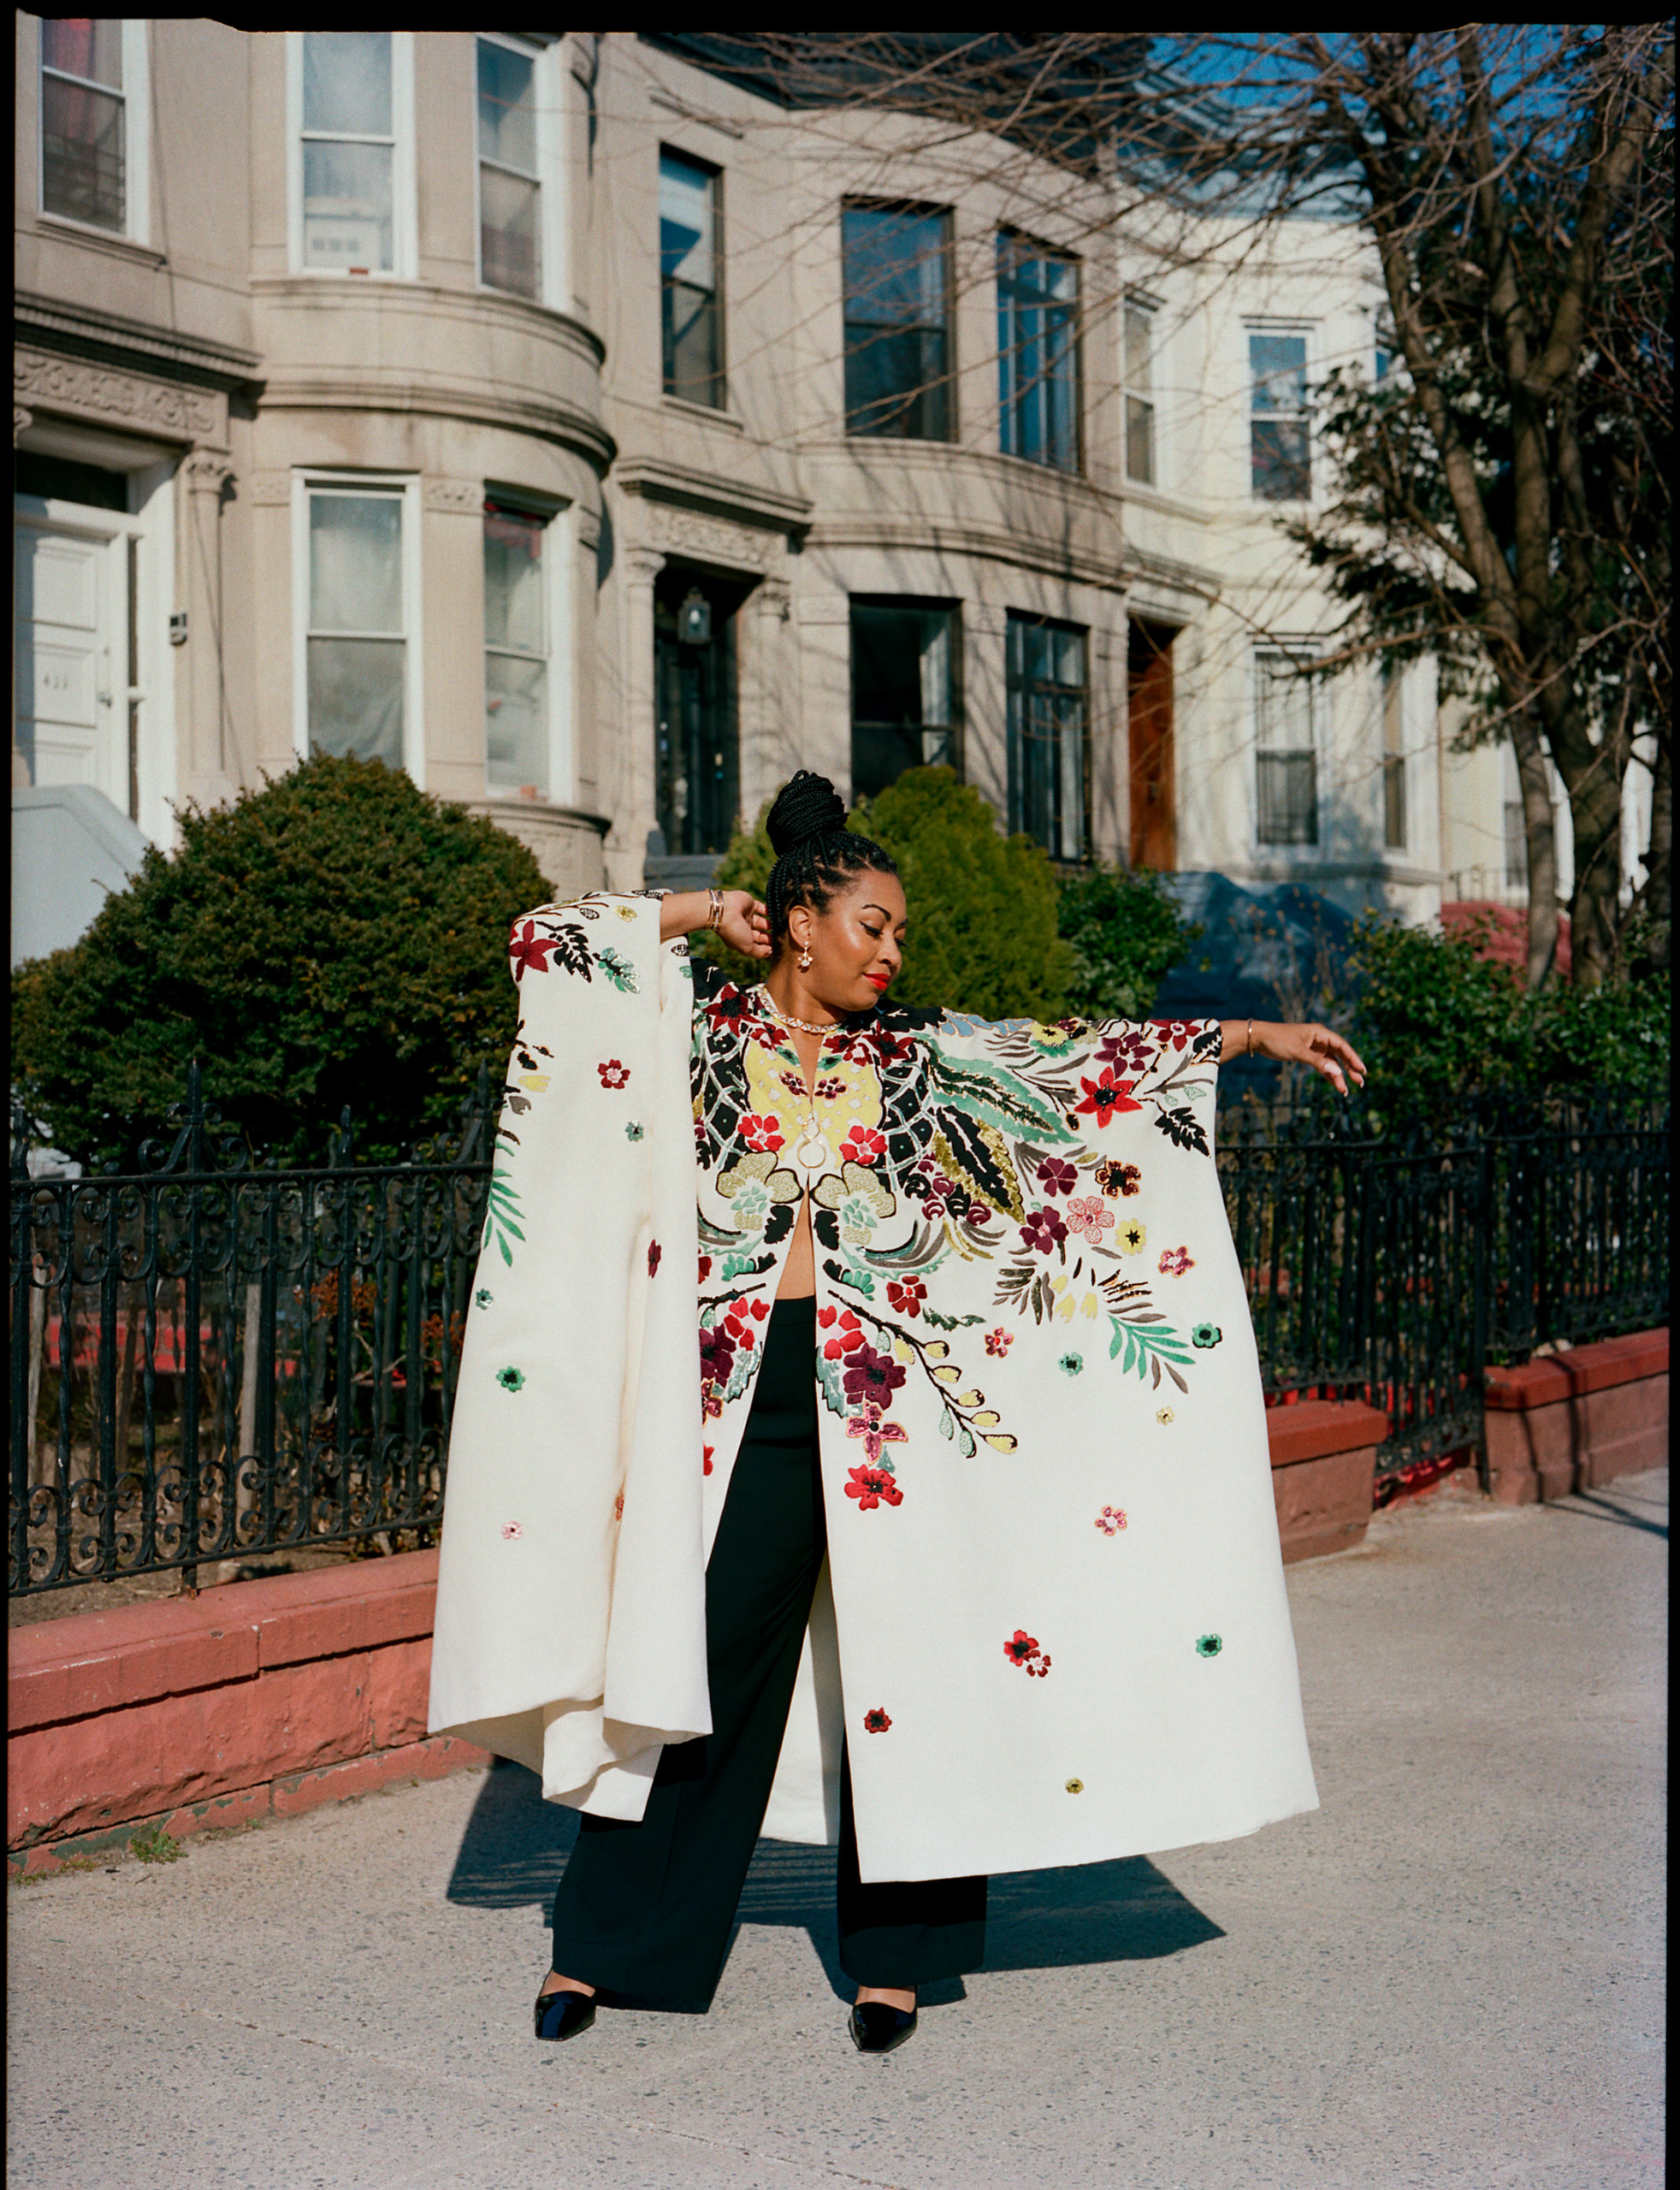 Rachel Cargle wears a Valentino robe, pants by Lafayette 148, shoes by Christian Louboutin and jewelry by Bulgari and Khiry. Styled by Becky Akinyode. Makeup by Jaleesa Jaikaran using Ilia Beauty.